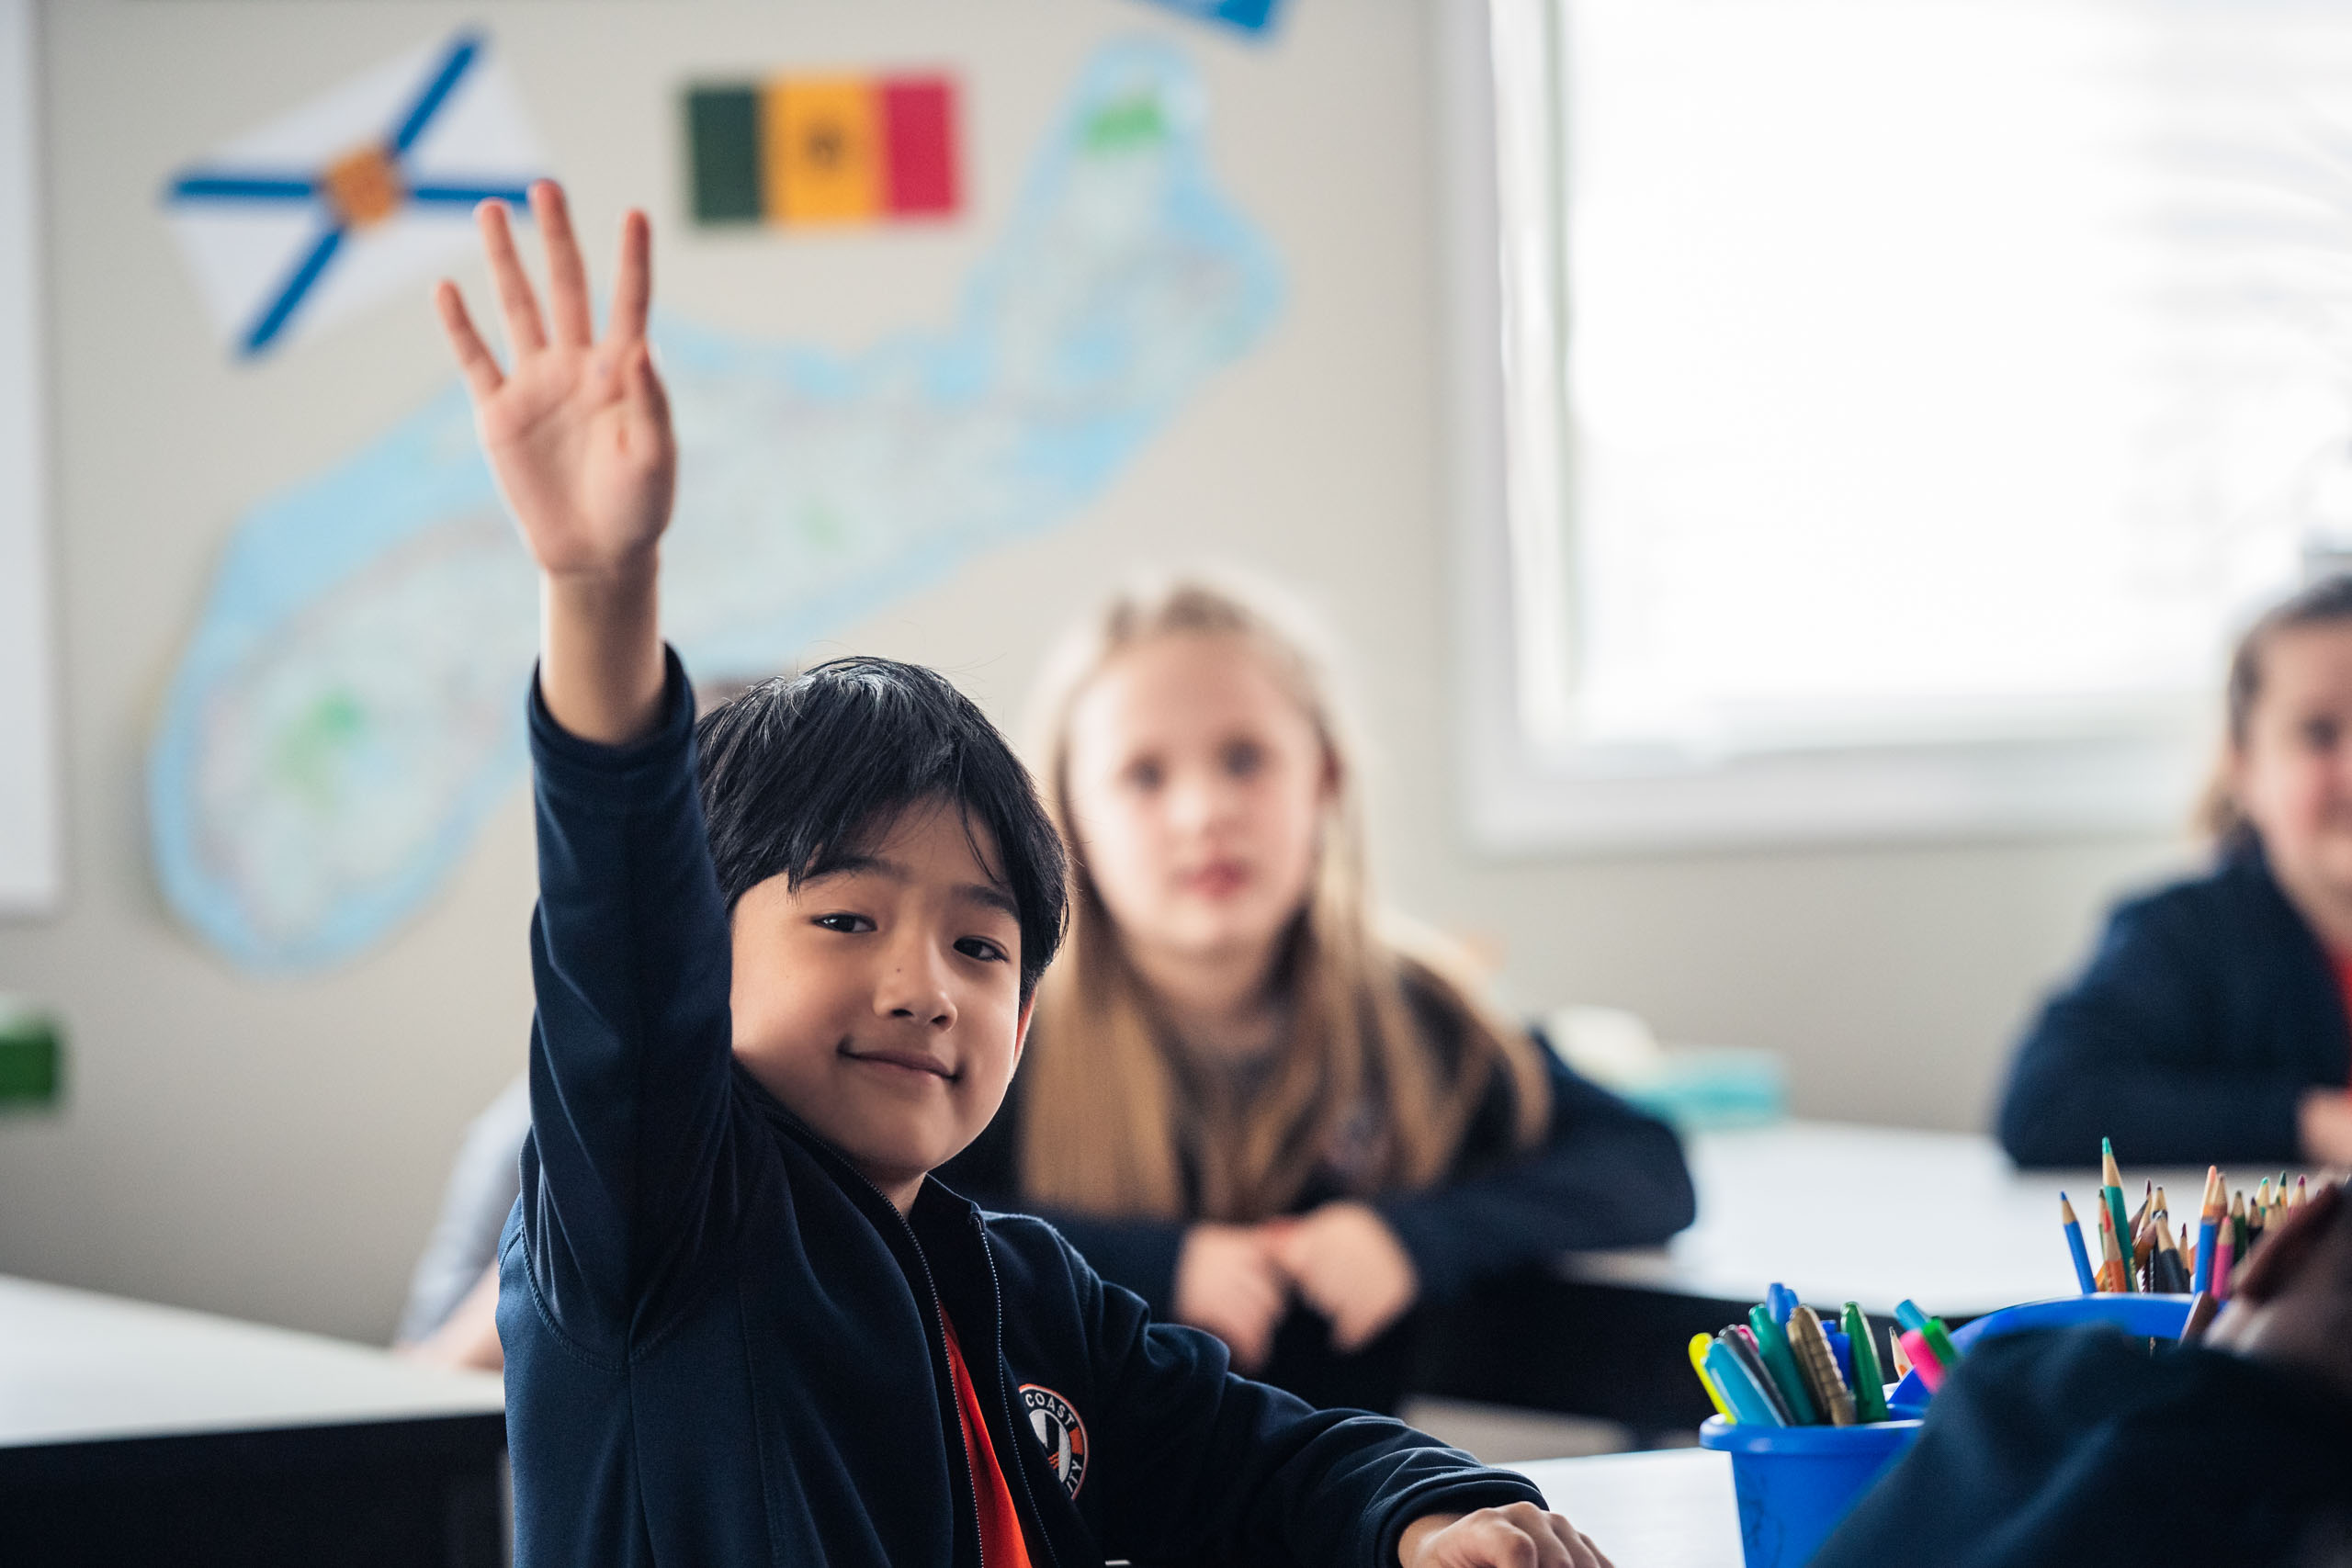 A young student raising their hand in class.